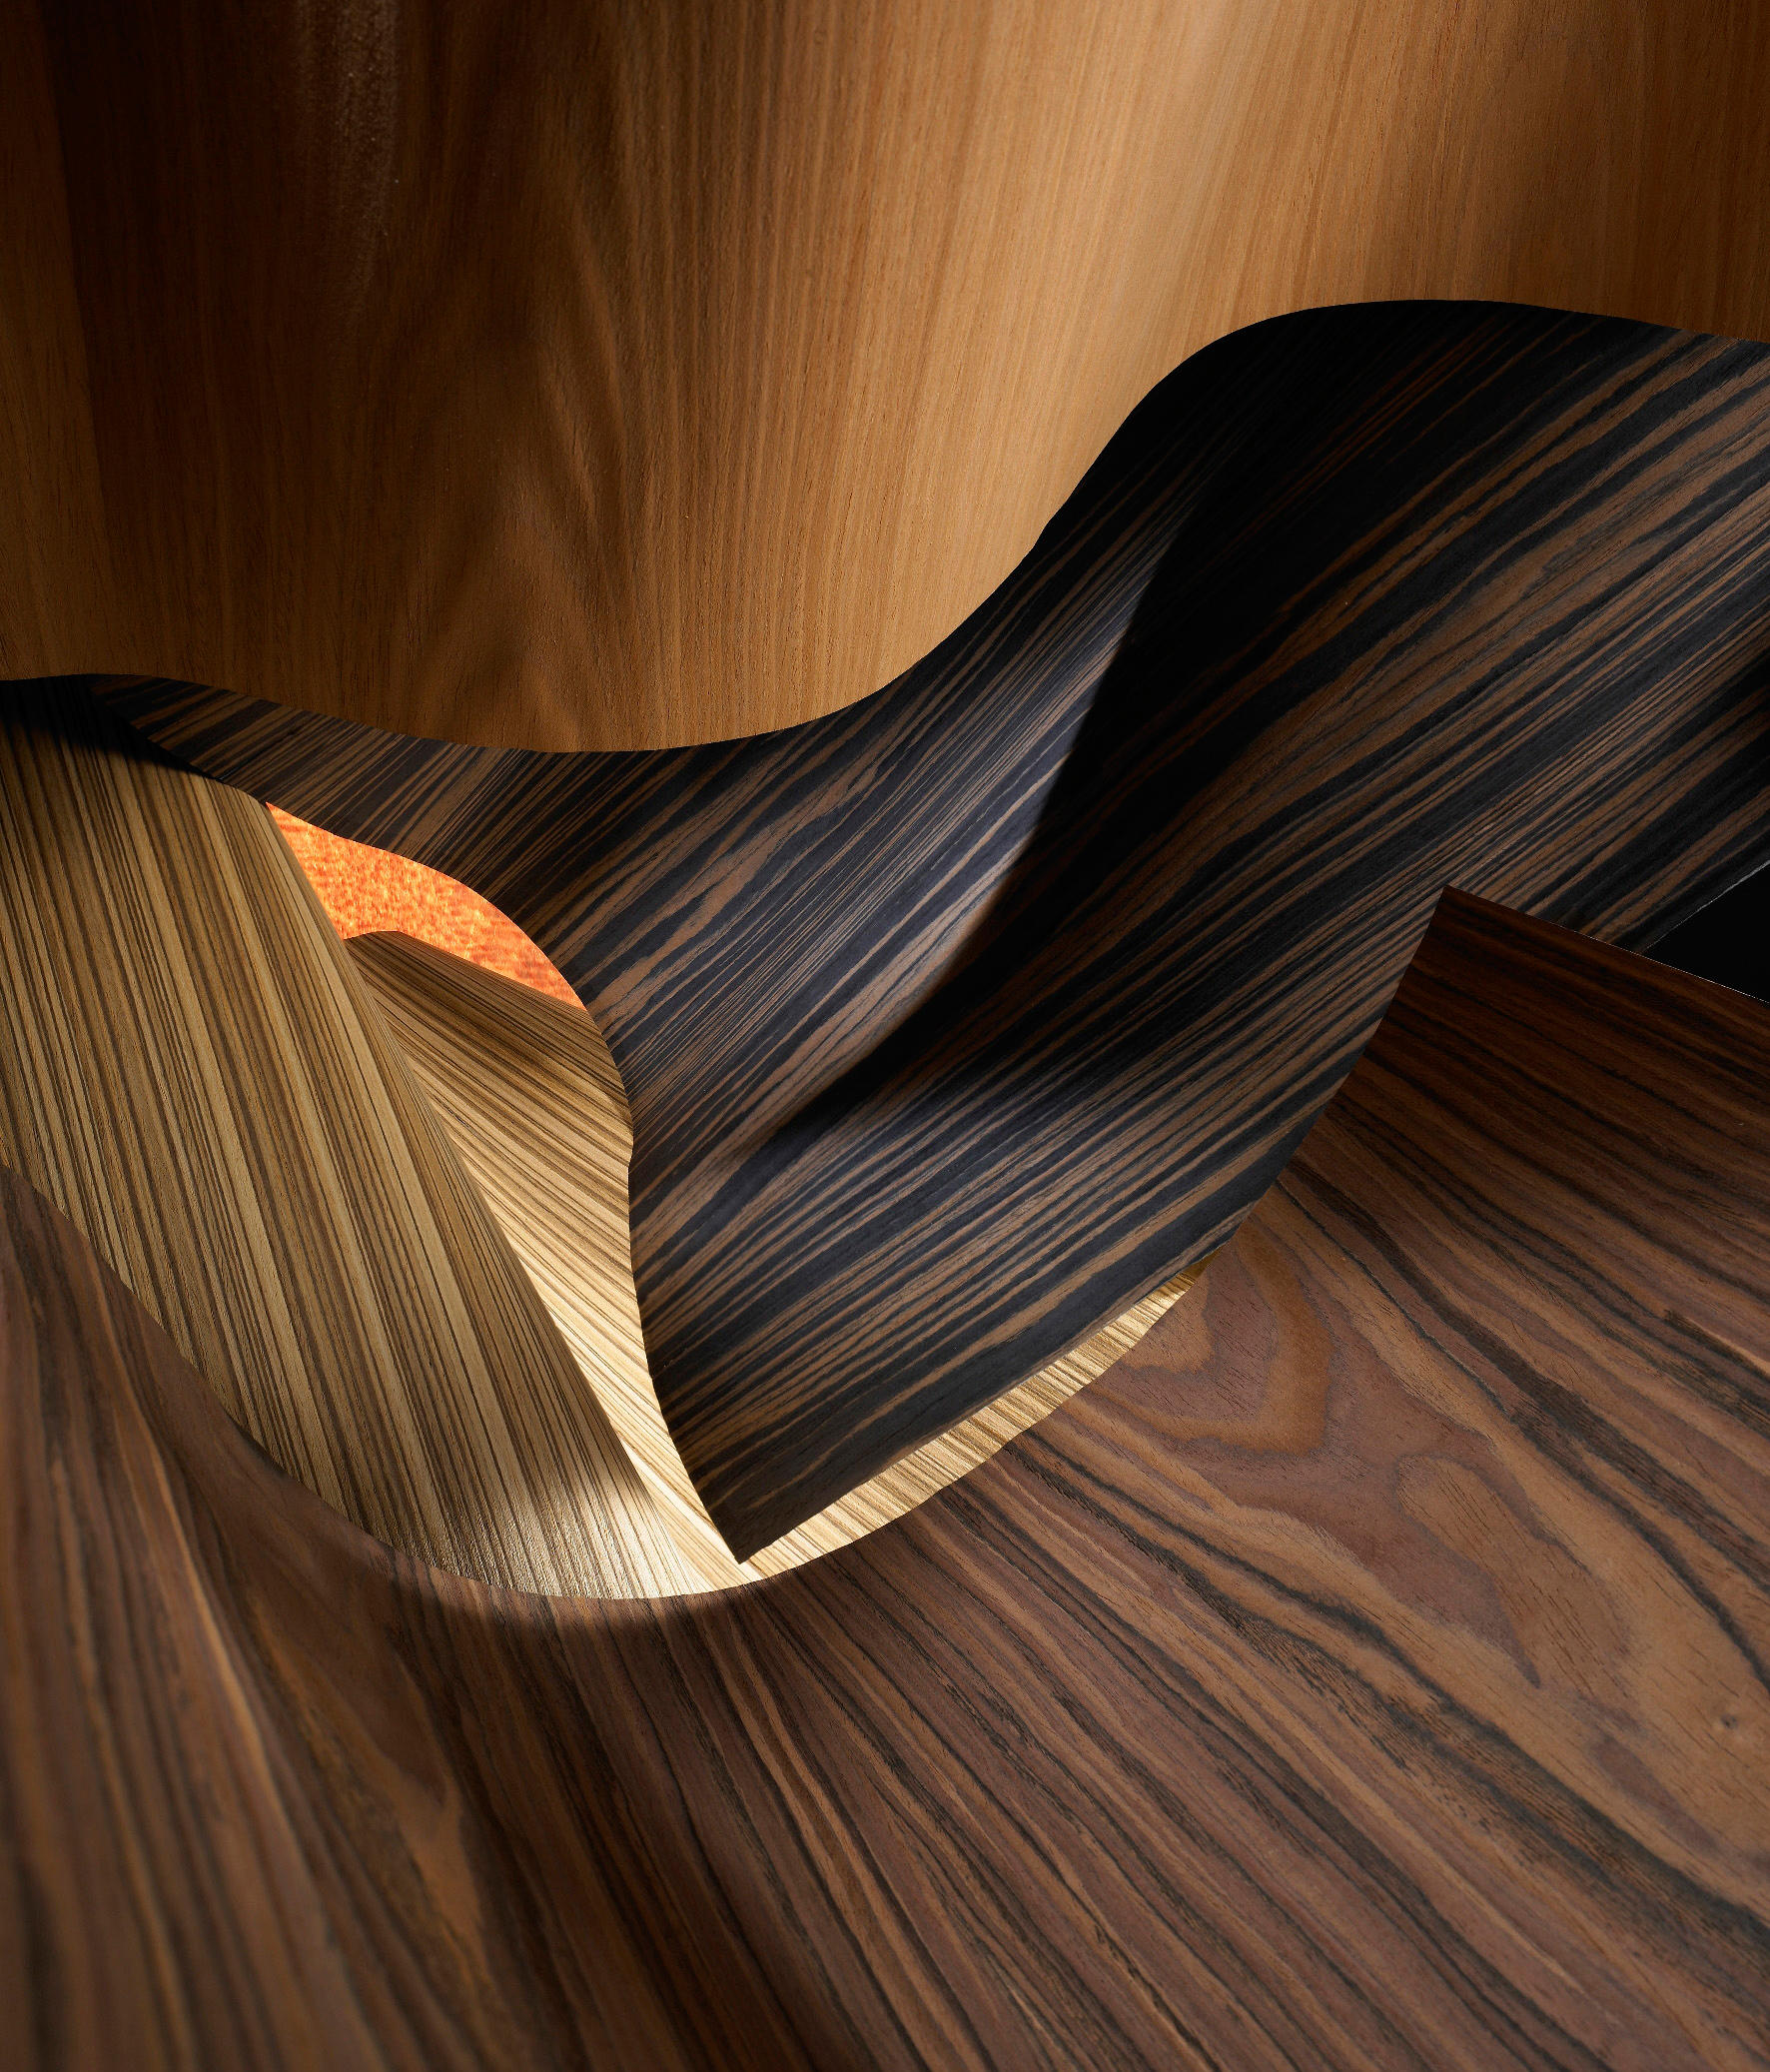 The Alpi Wood Collection: More Than Just Wood